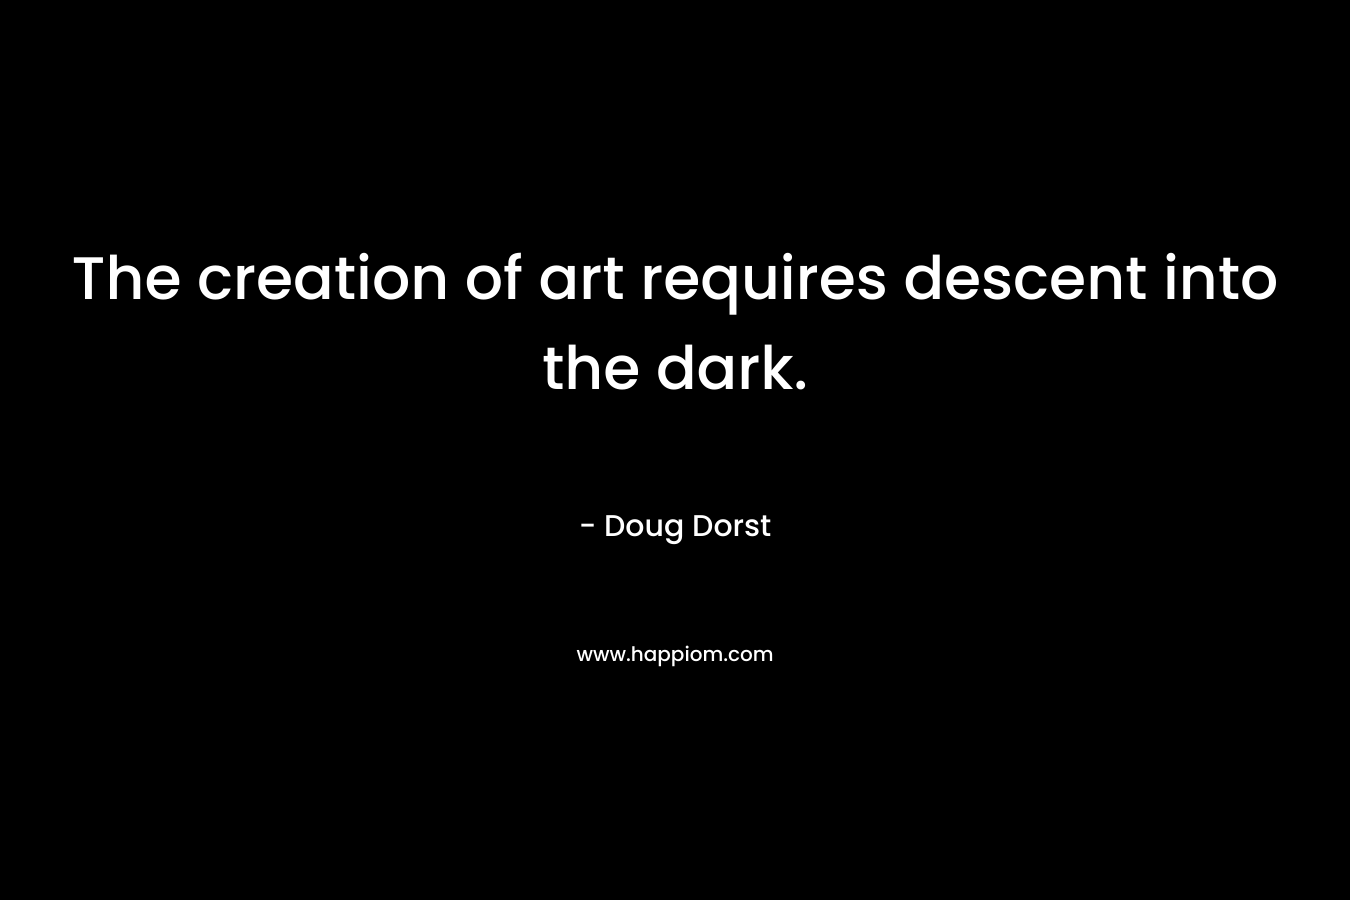 The creation of art requires descent into the dark.